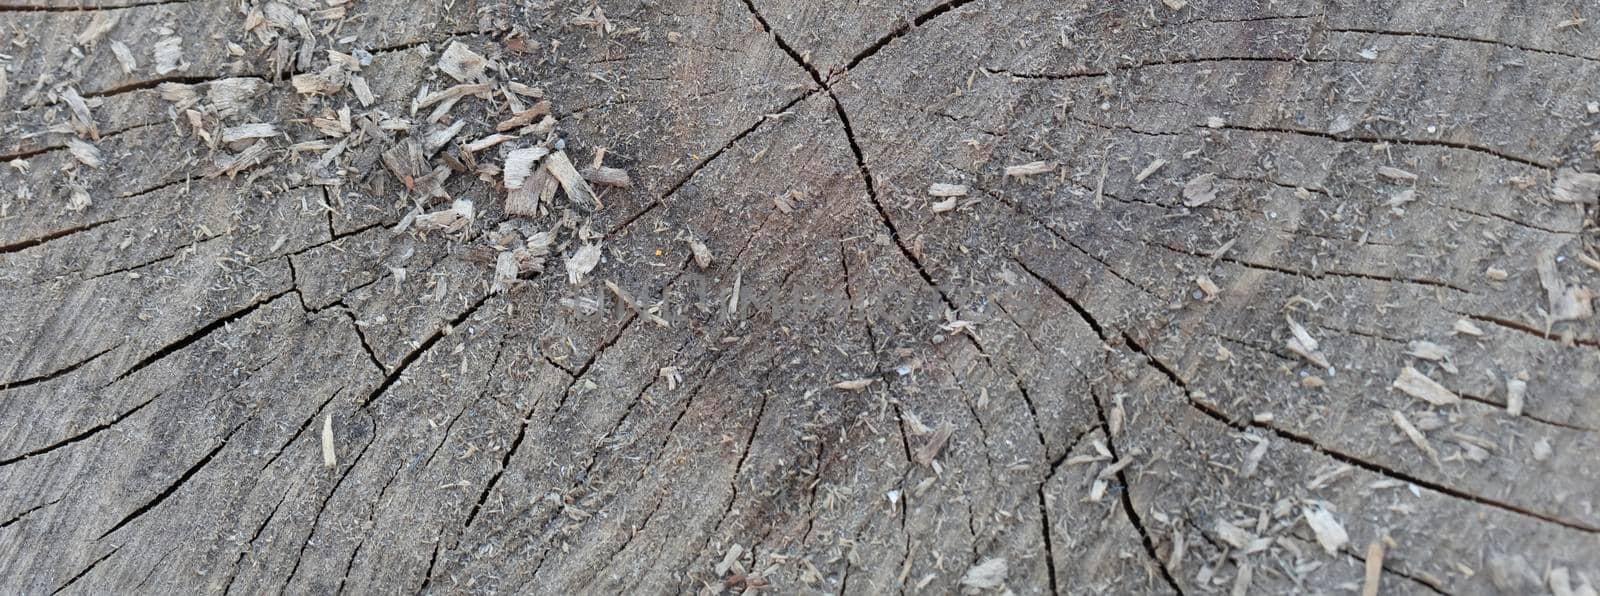 Wooden texture of an old tree with crevices.